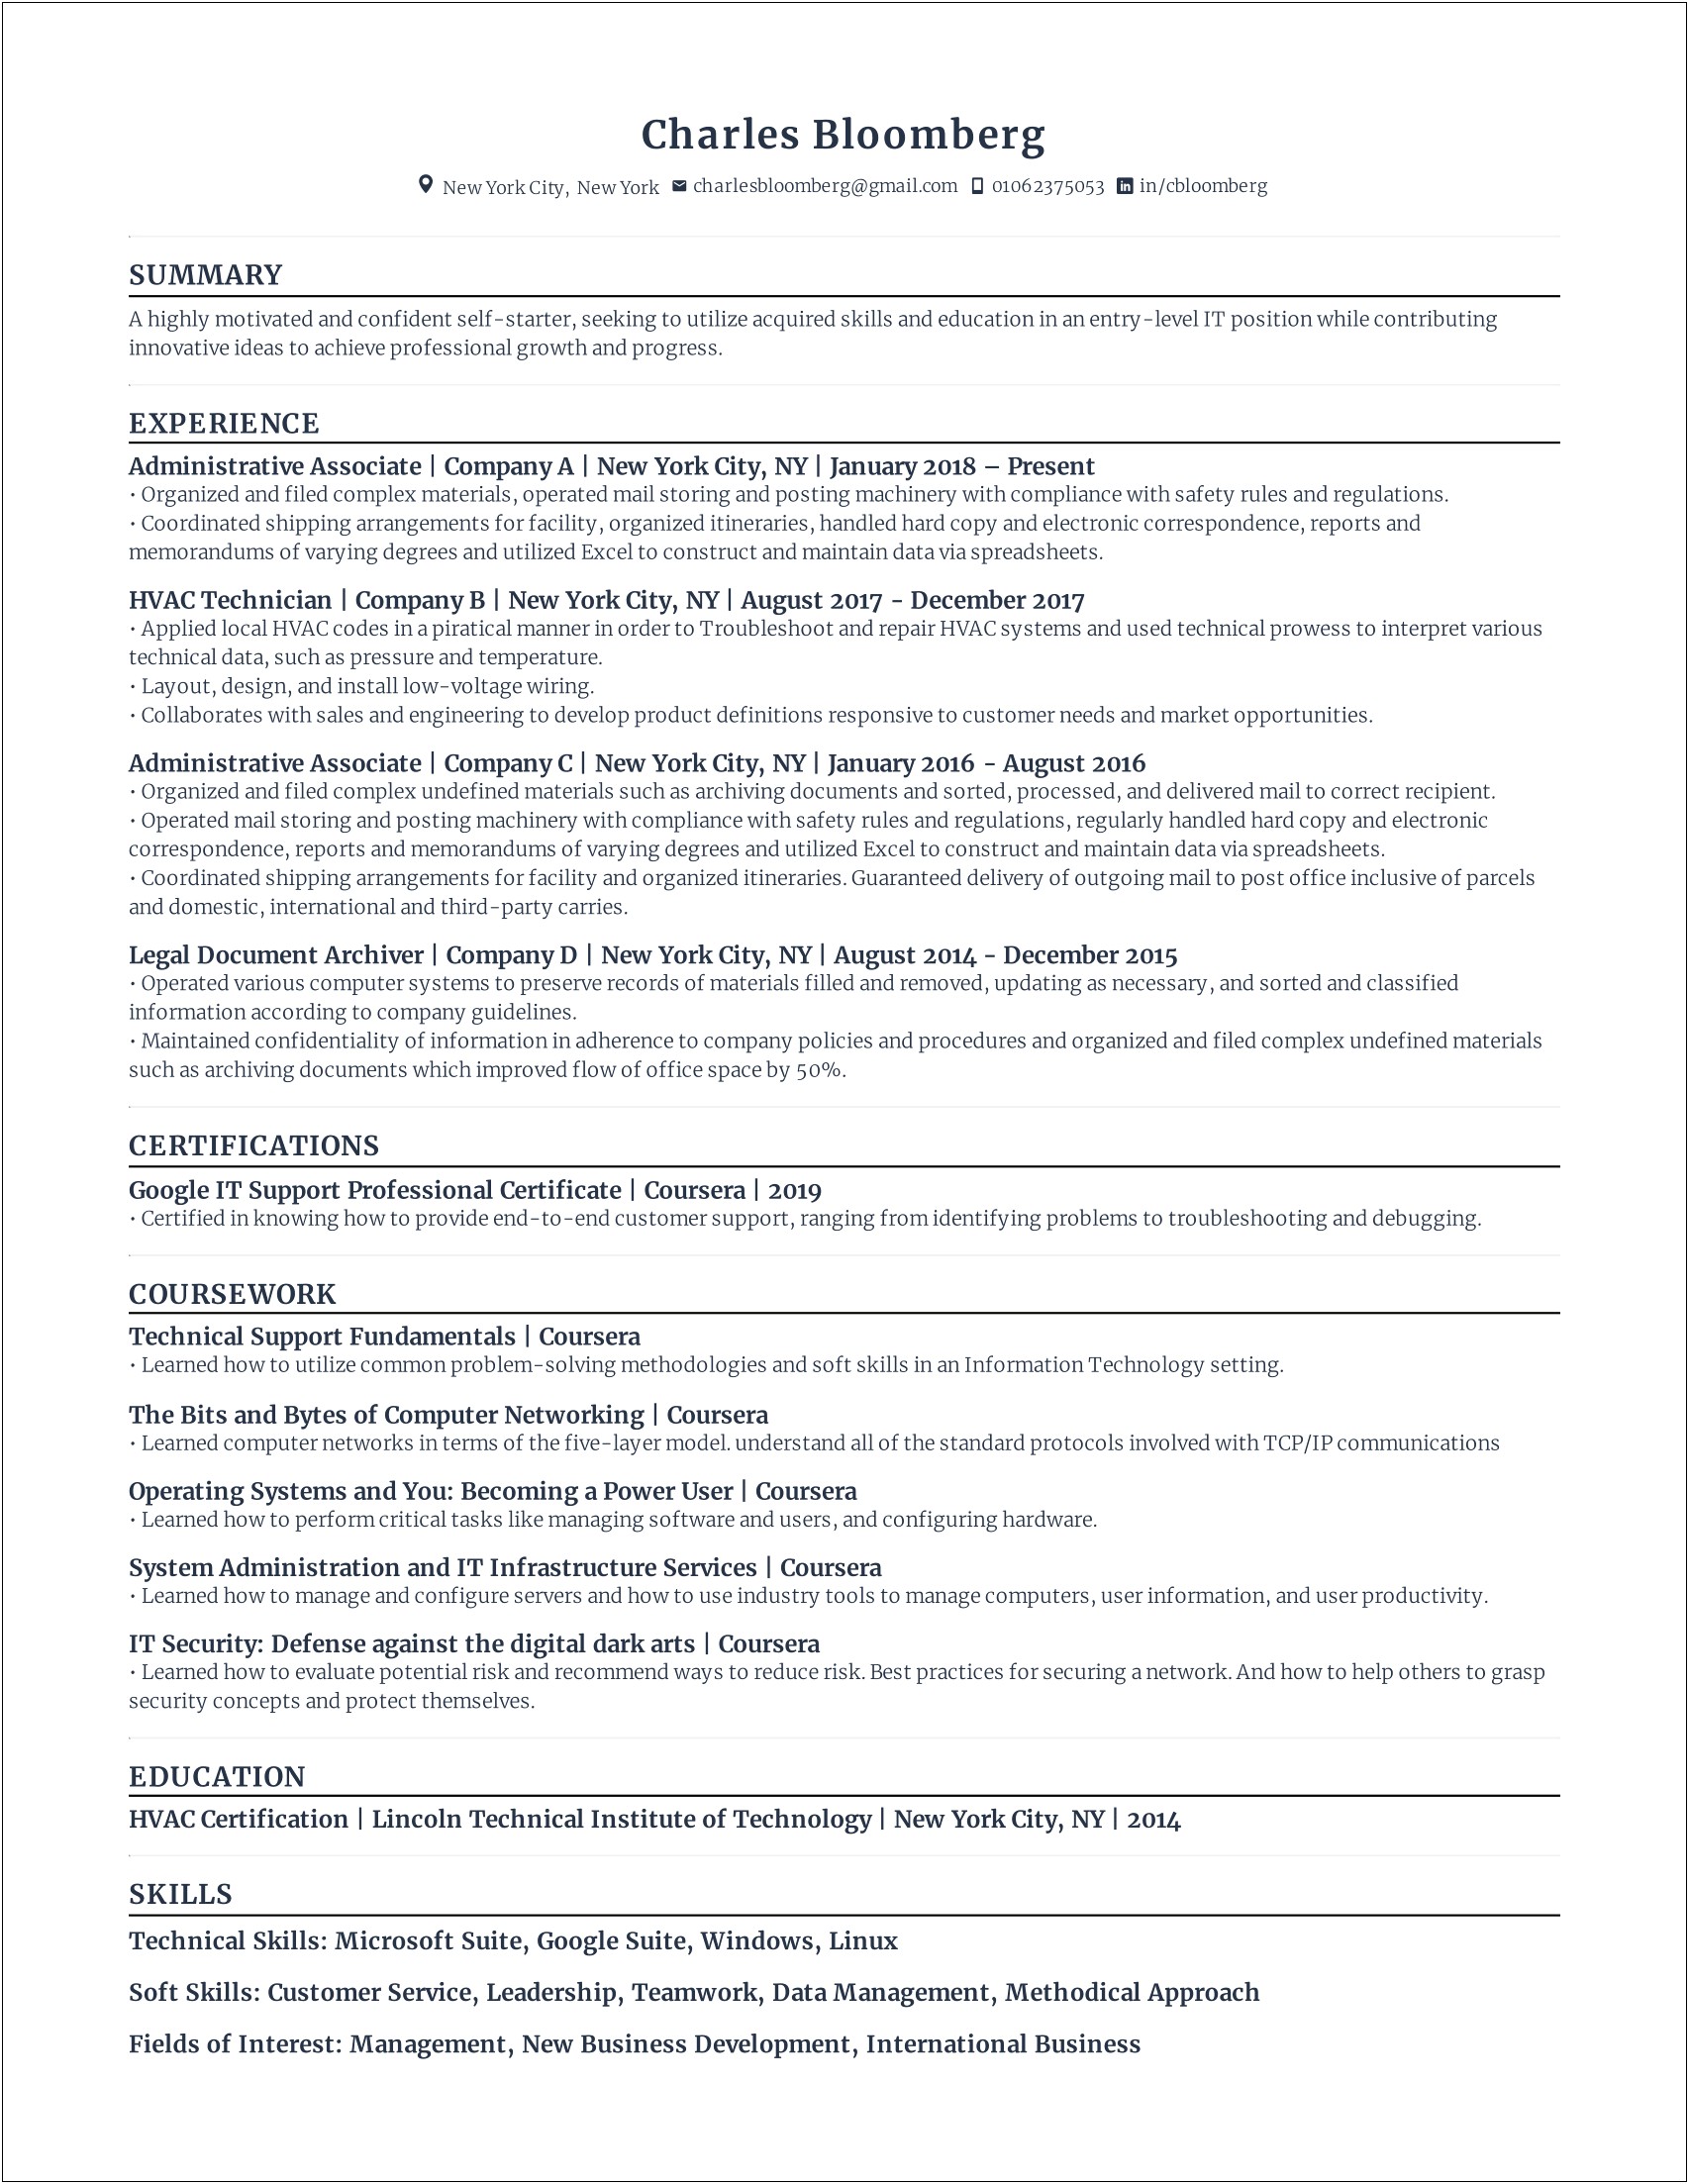 Working As A Library Assistant Resume